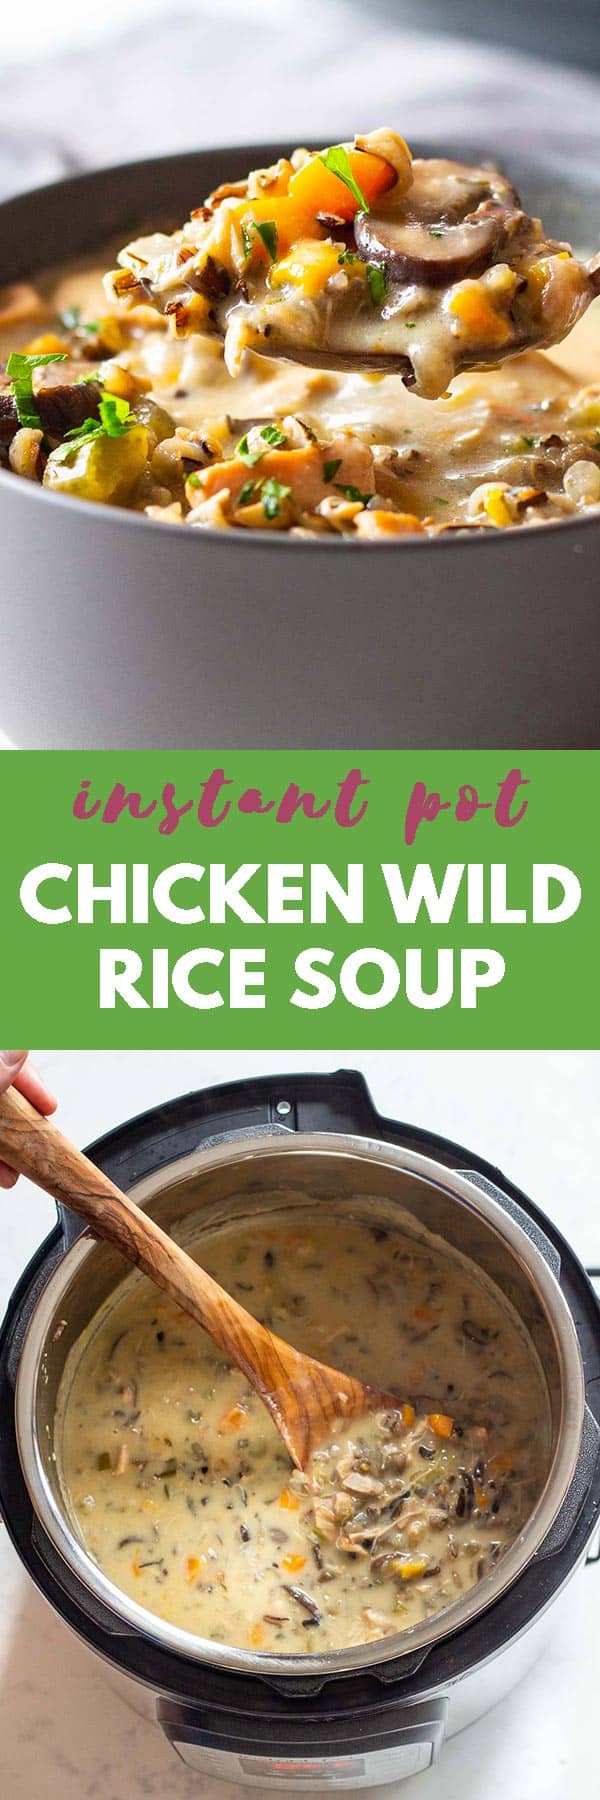 Instant Pot Chicken Wild Rice Soup - Green Healthy Cooking